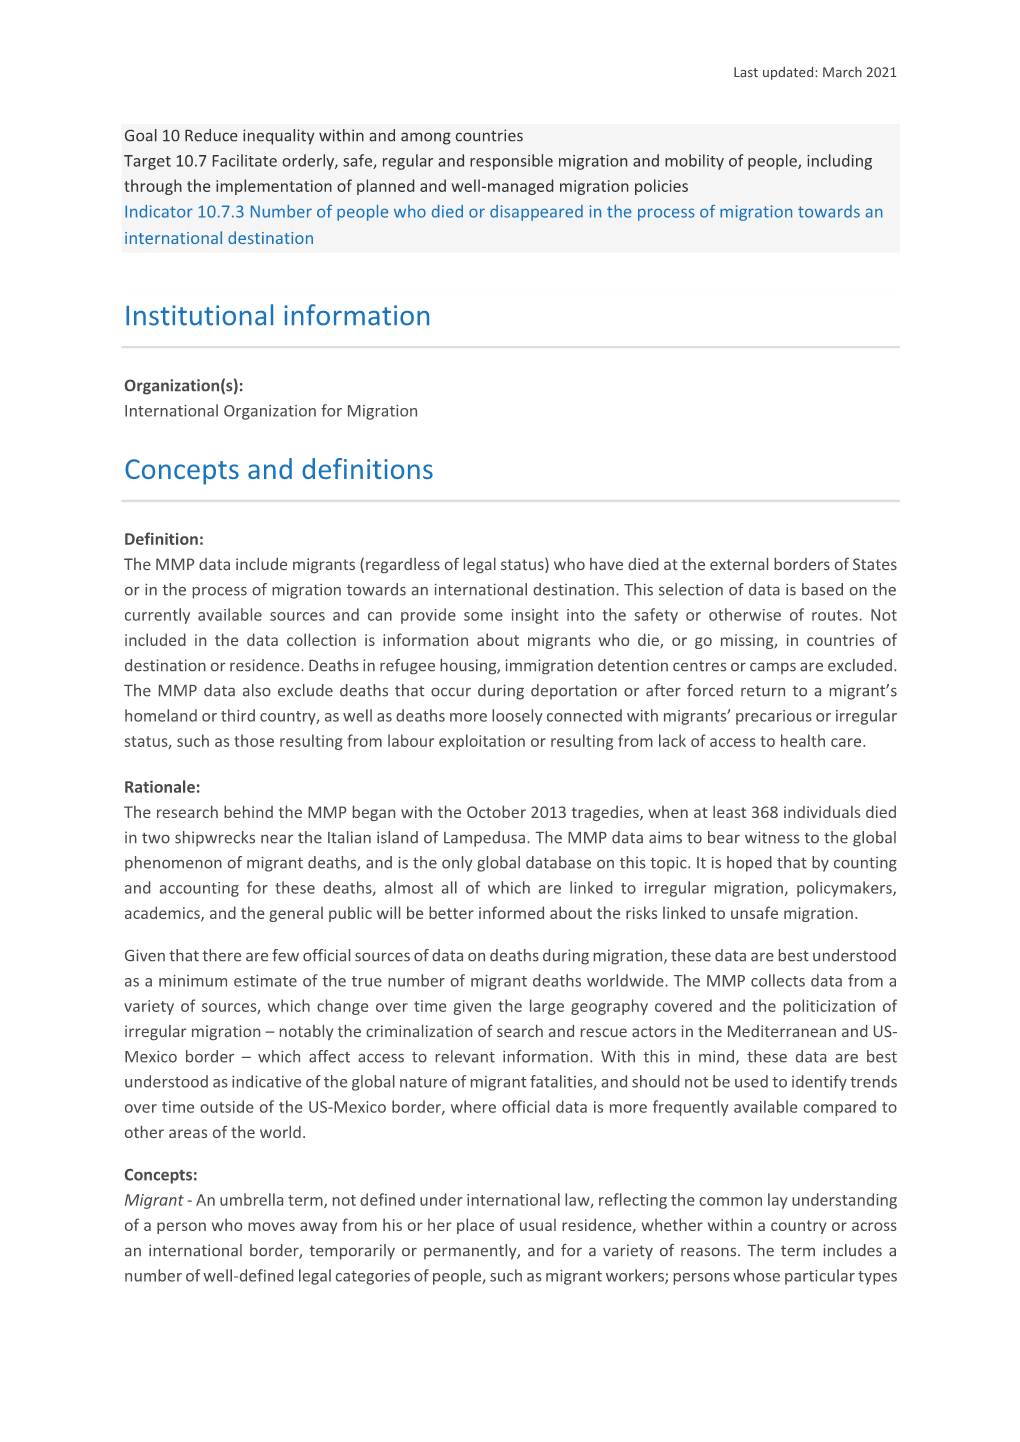 Institutional Information Concepts and Definitions